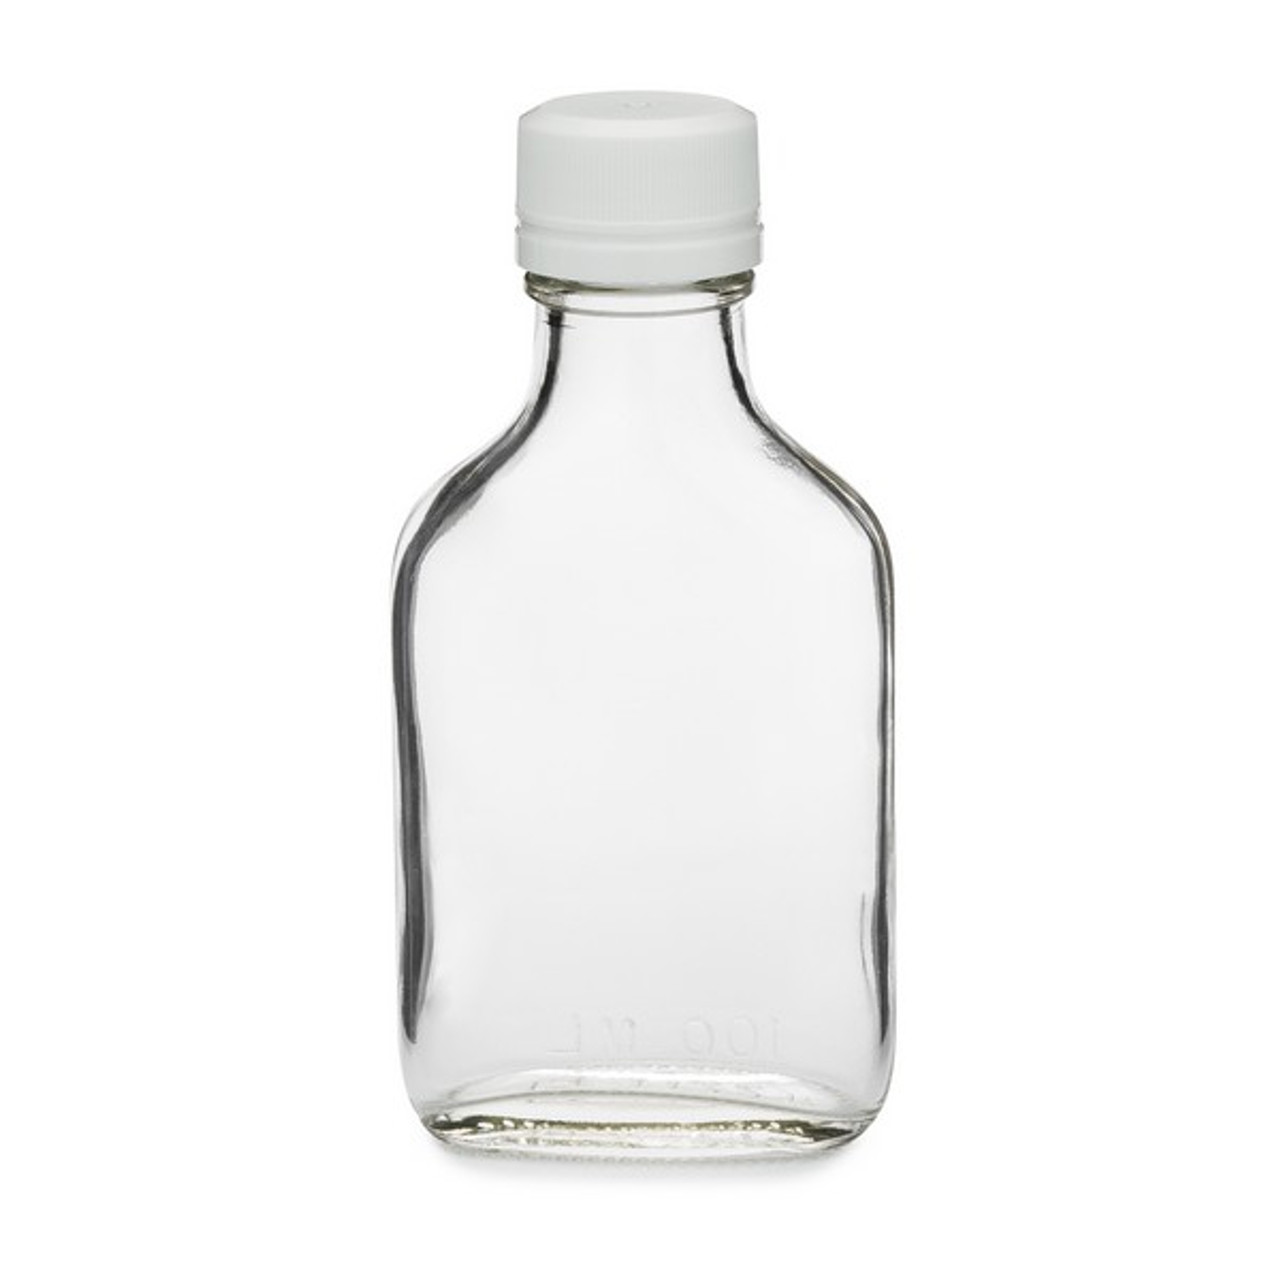 16oz Clear Glass Short Milk Bottles (White Tamper-Evident Cap) - Wholesale, 24/Case, Clear Type III BPA Free 48 mm